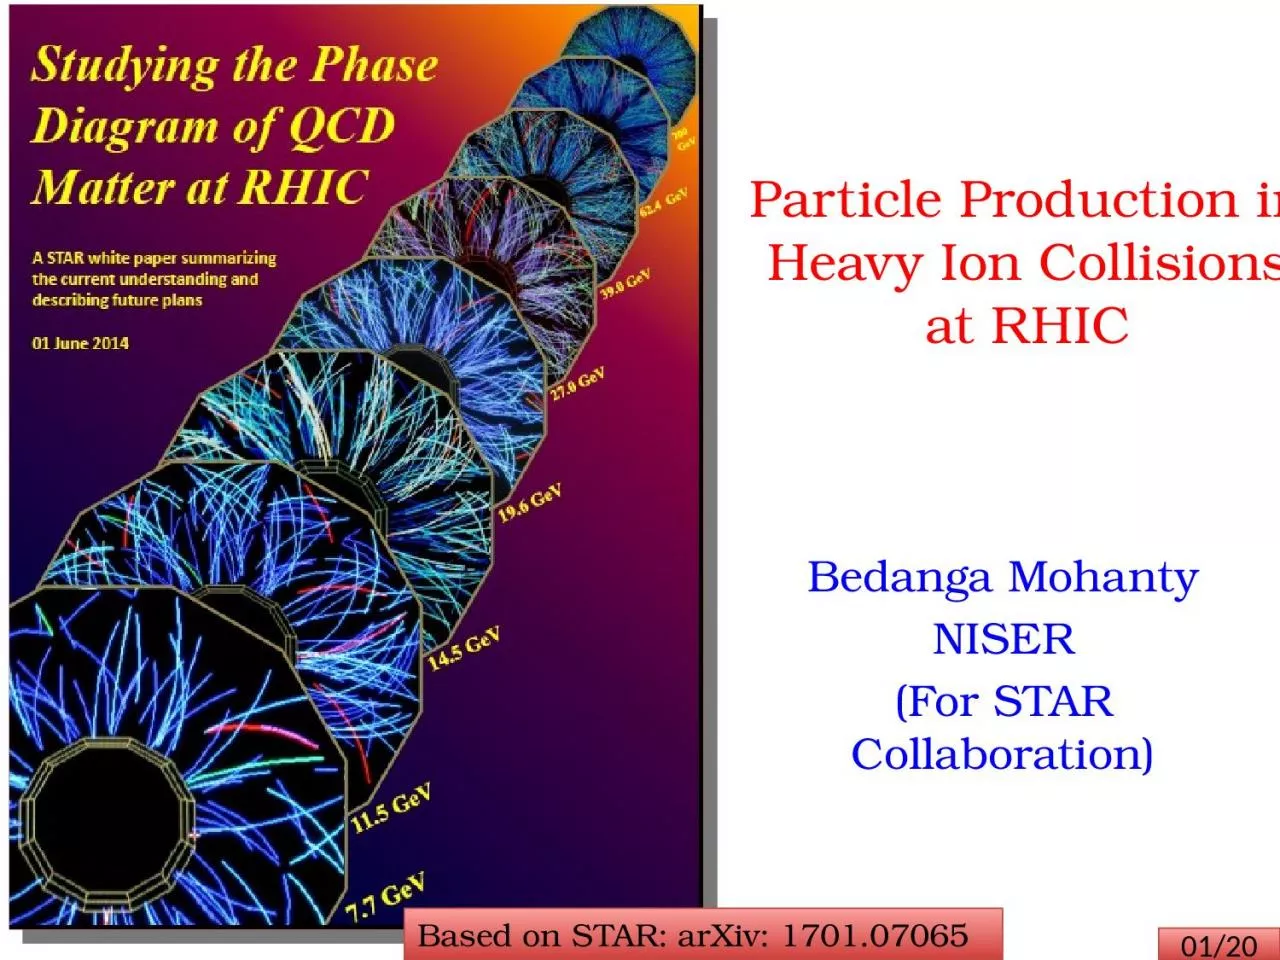 Particle Production in Heavy Ion Collisions at RHIC